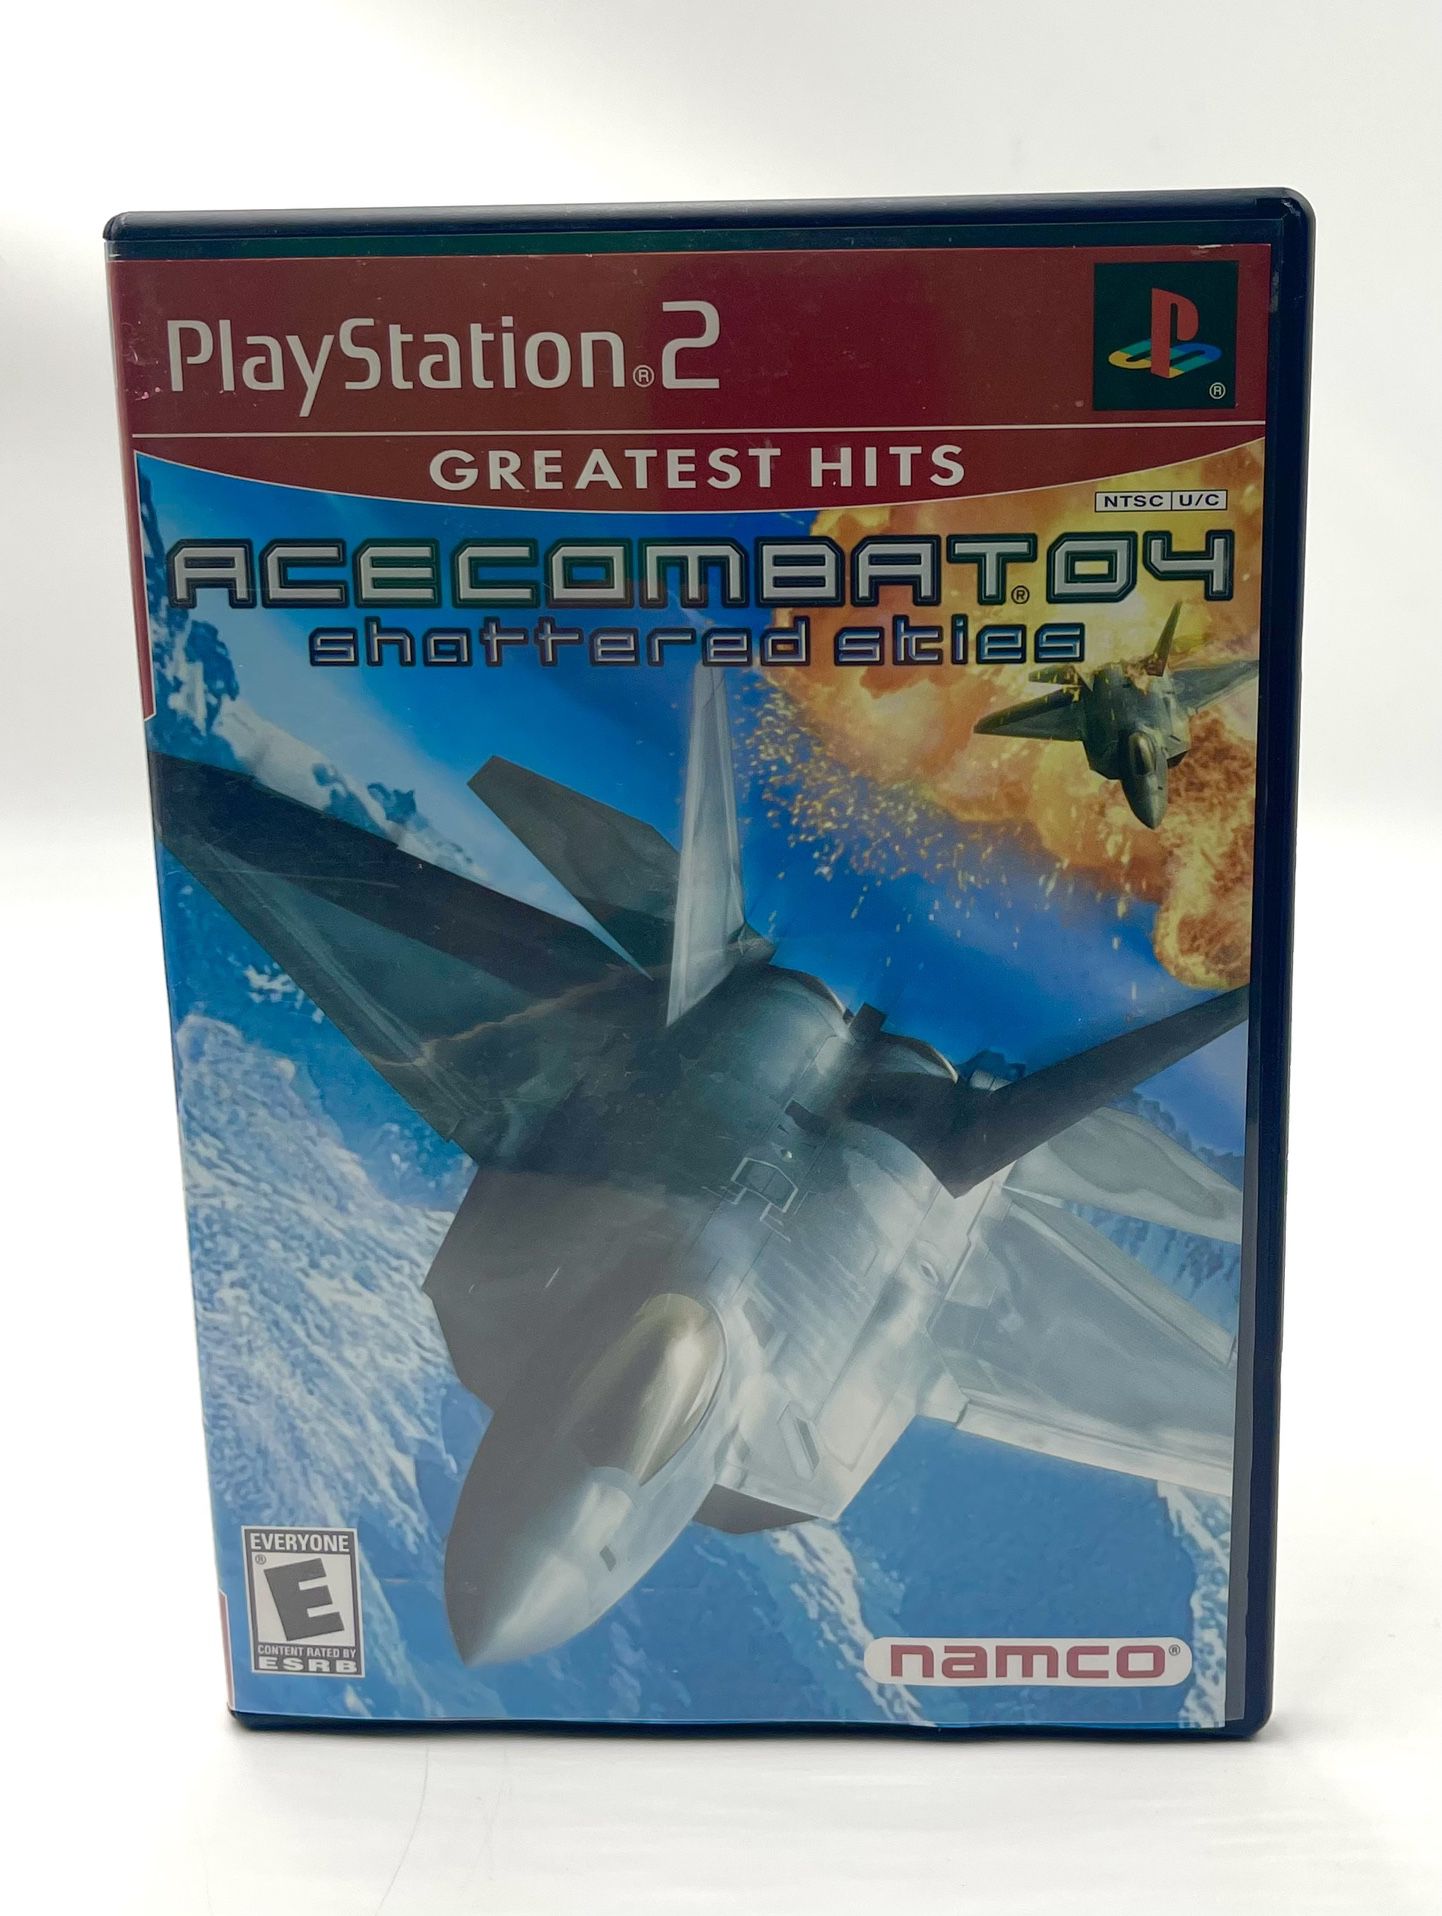 Ace Combat 4 Shattered Skies PS2 Greatest Hits Video Game 